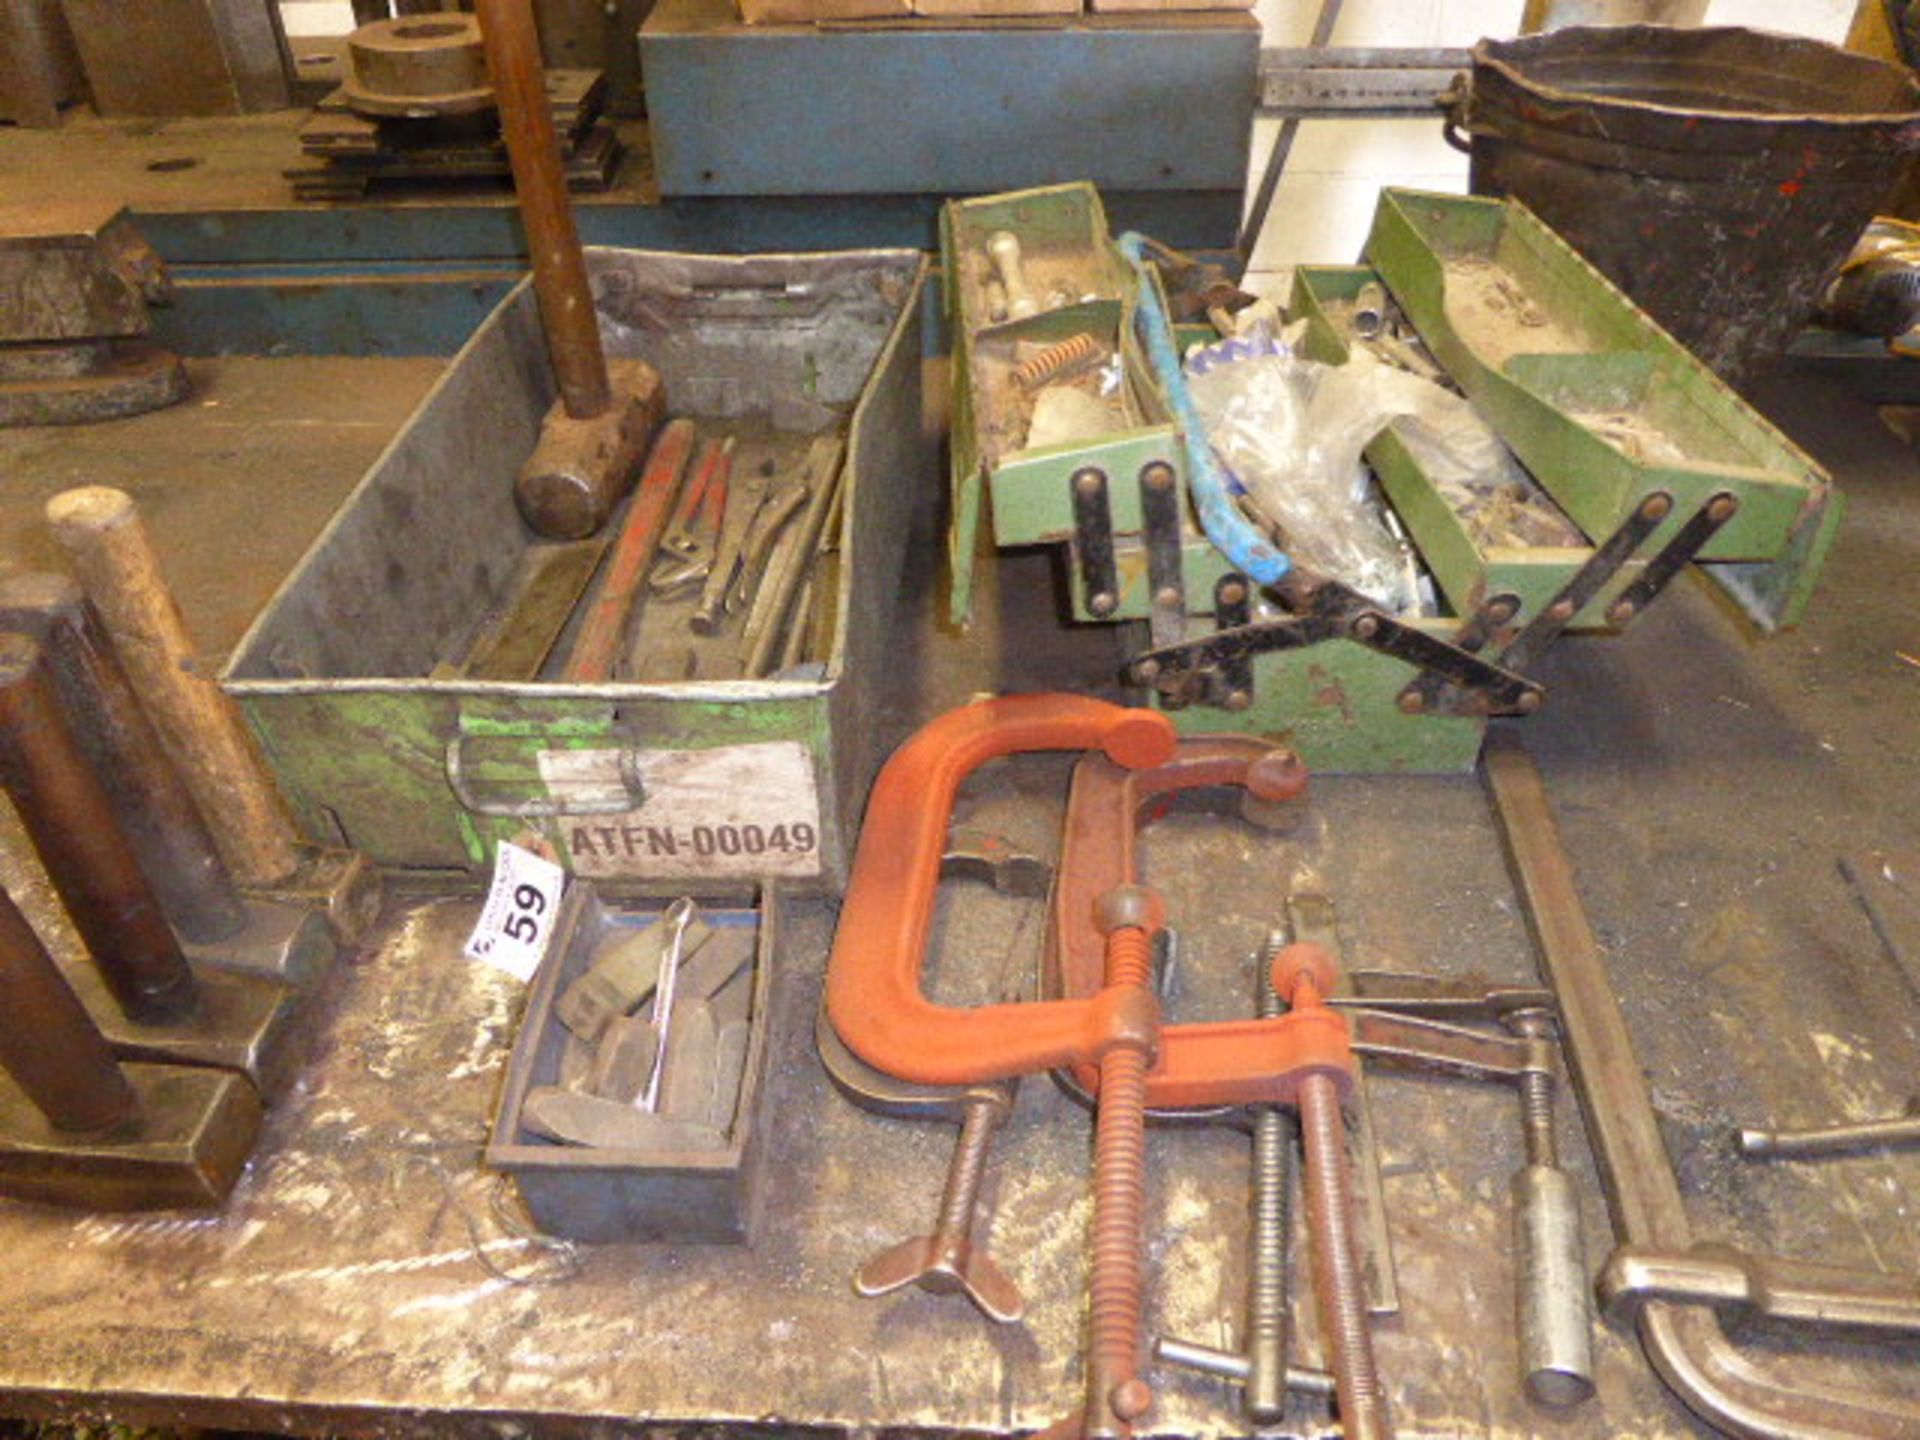 Qty of G&F clamps, hand tools and hammers in a tool box and tote tray